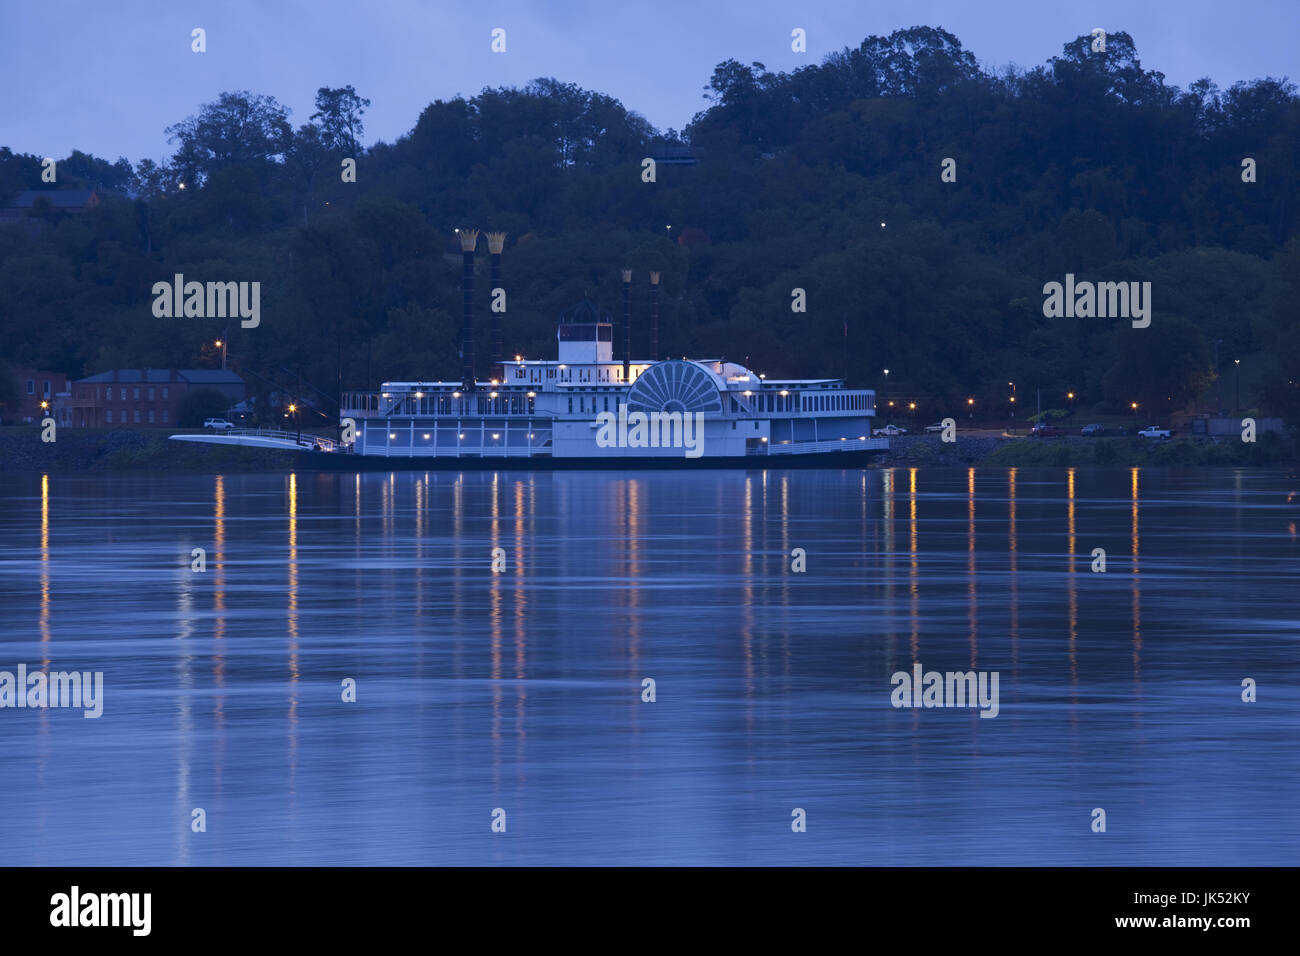 USA, Mississippi, Natchez, Natchez Under the Hill, former red-light area, with Isle of Capri Casino riverboat, dawn Stock Photo